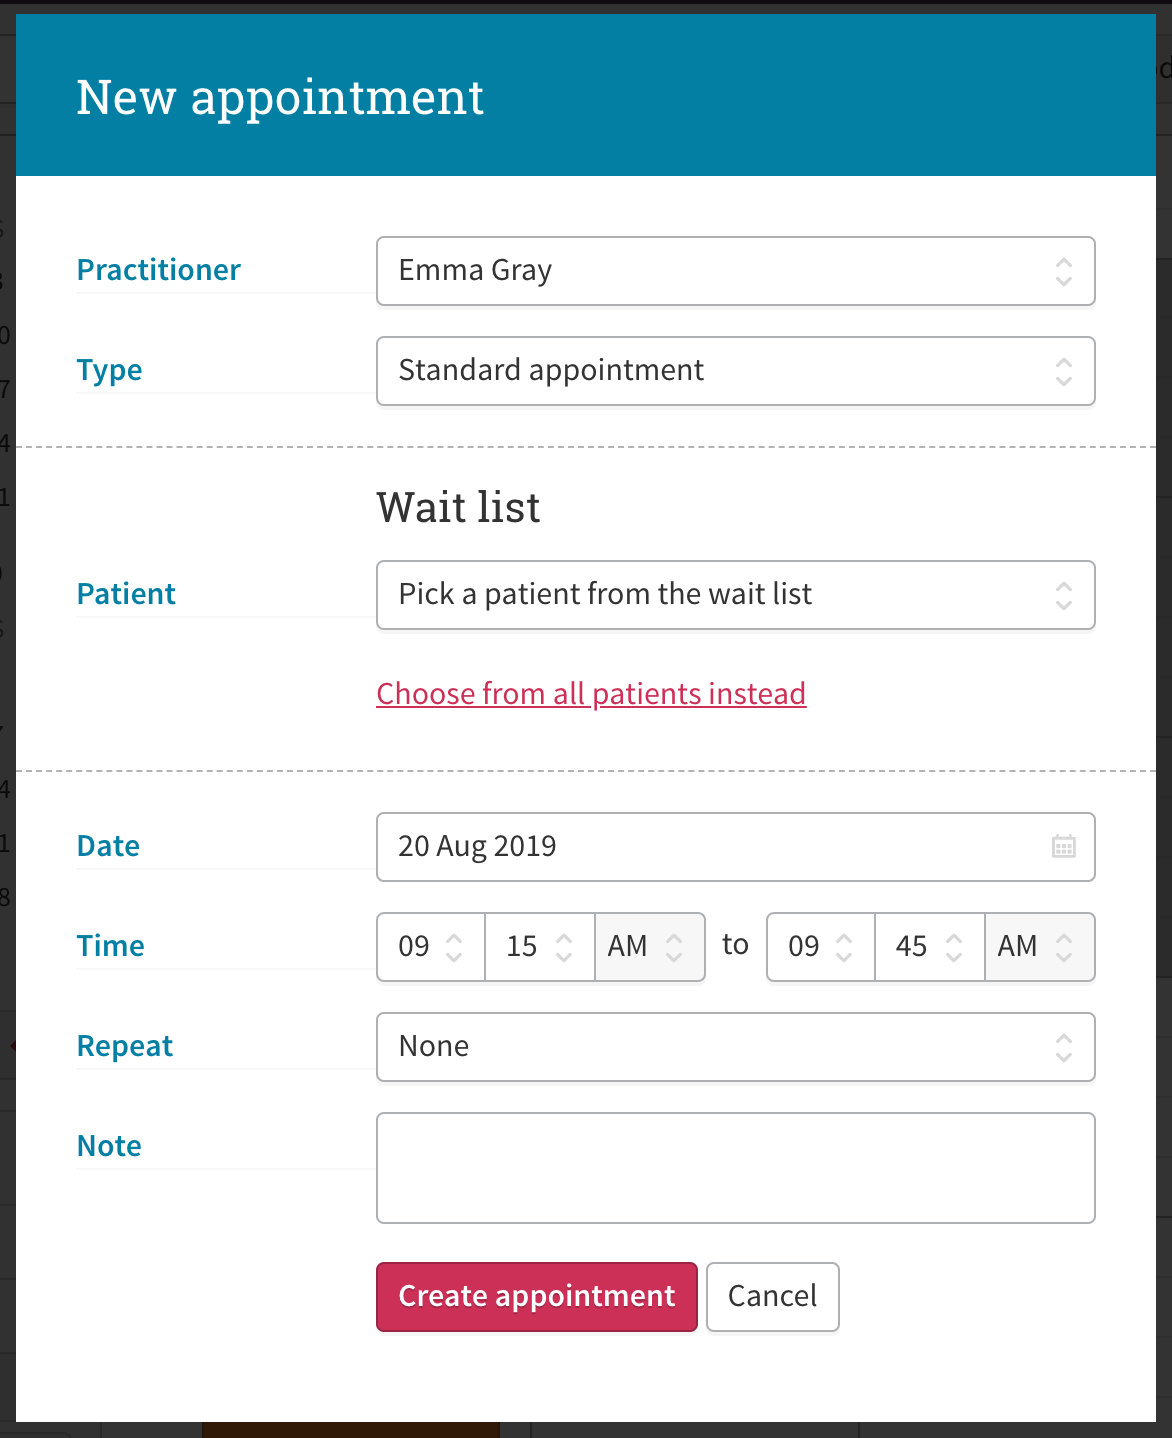 A screenshot showing how to select a patient from the wait list when creating a new appointment